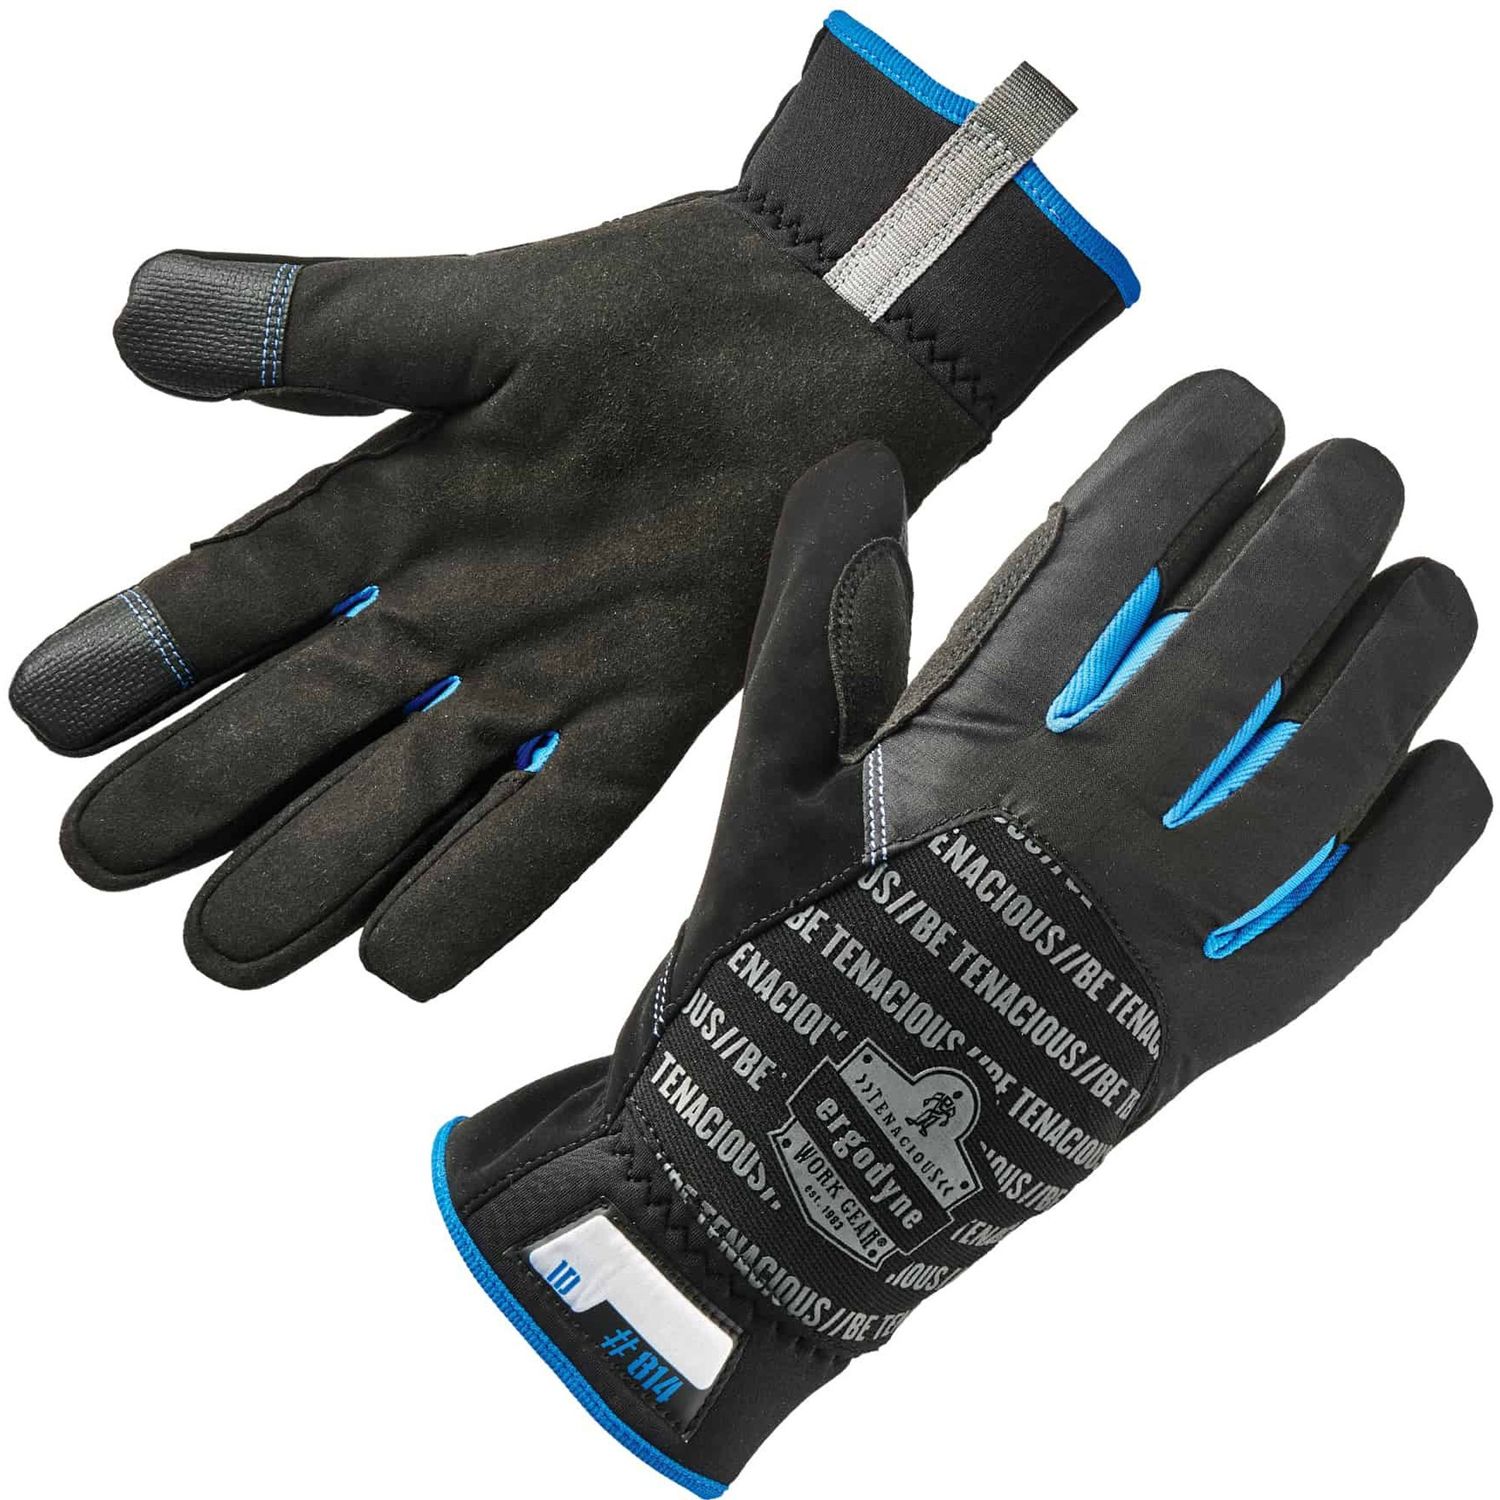 814 Thermal Utility Gloves Thermal Protection, Large Size, Synthetic Leather Palm, Black